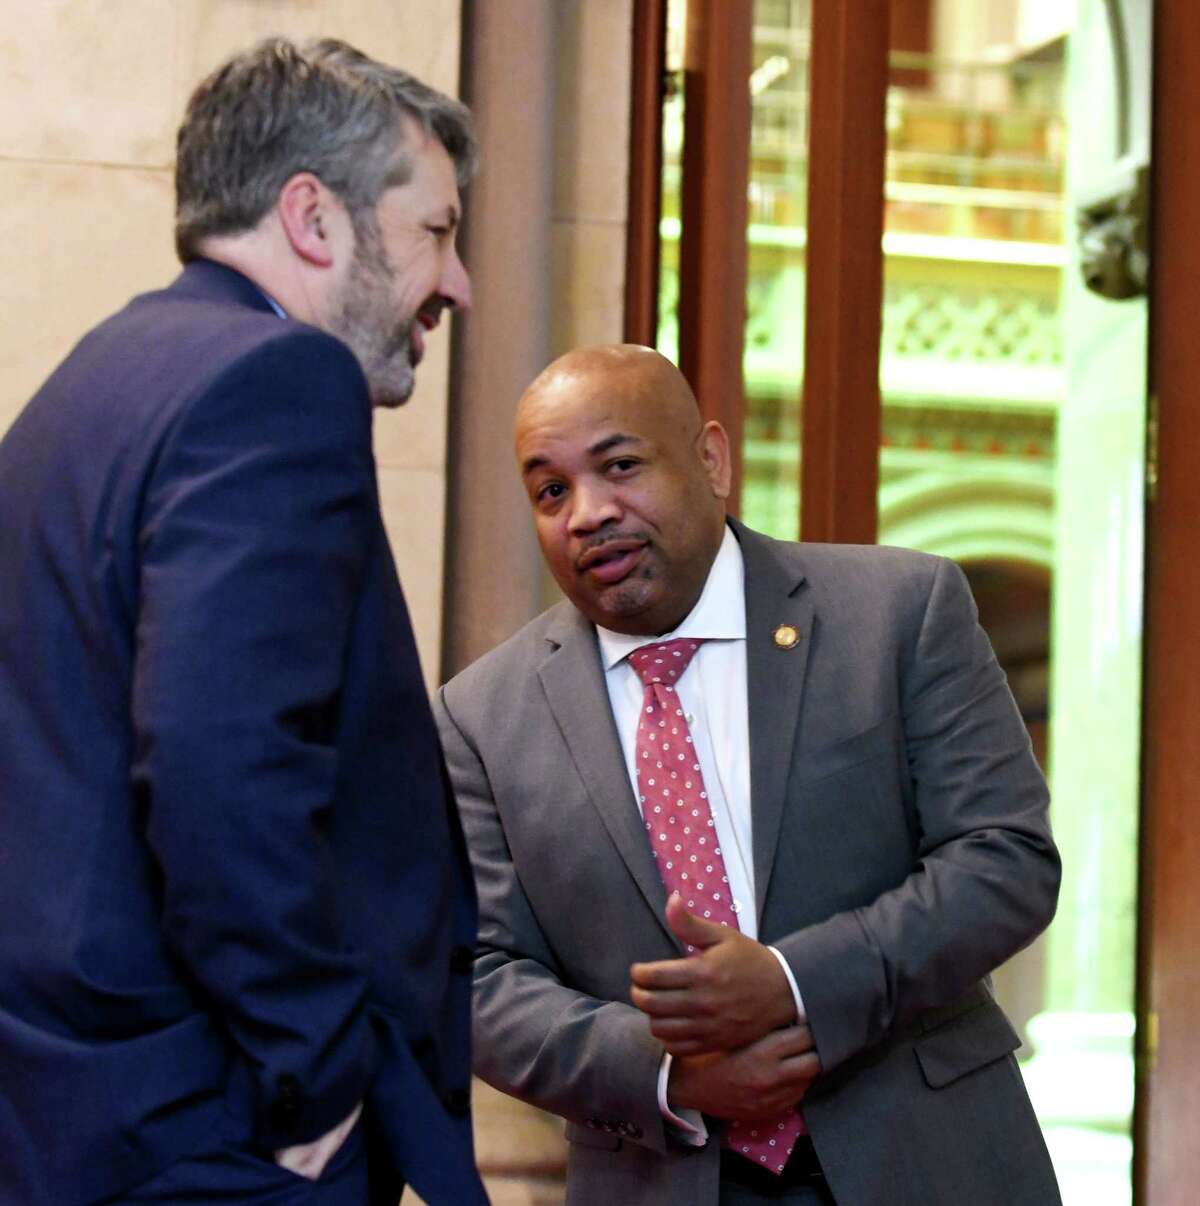 Assembly Speaker Carl Heastie, right, is joined by his communications director Mike whyland, left, while speaking to a reporter outside his Assembly office on Friday, March 29, 2019, at the Capitol in Albany, N.Y. (Will Waldron/Times Union)